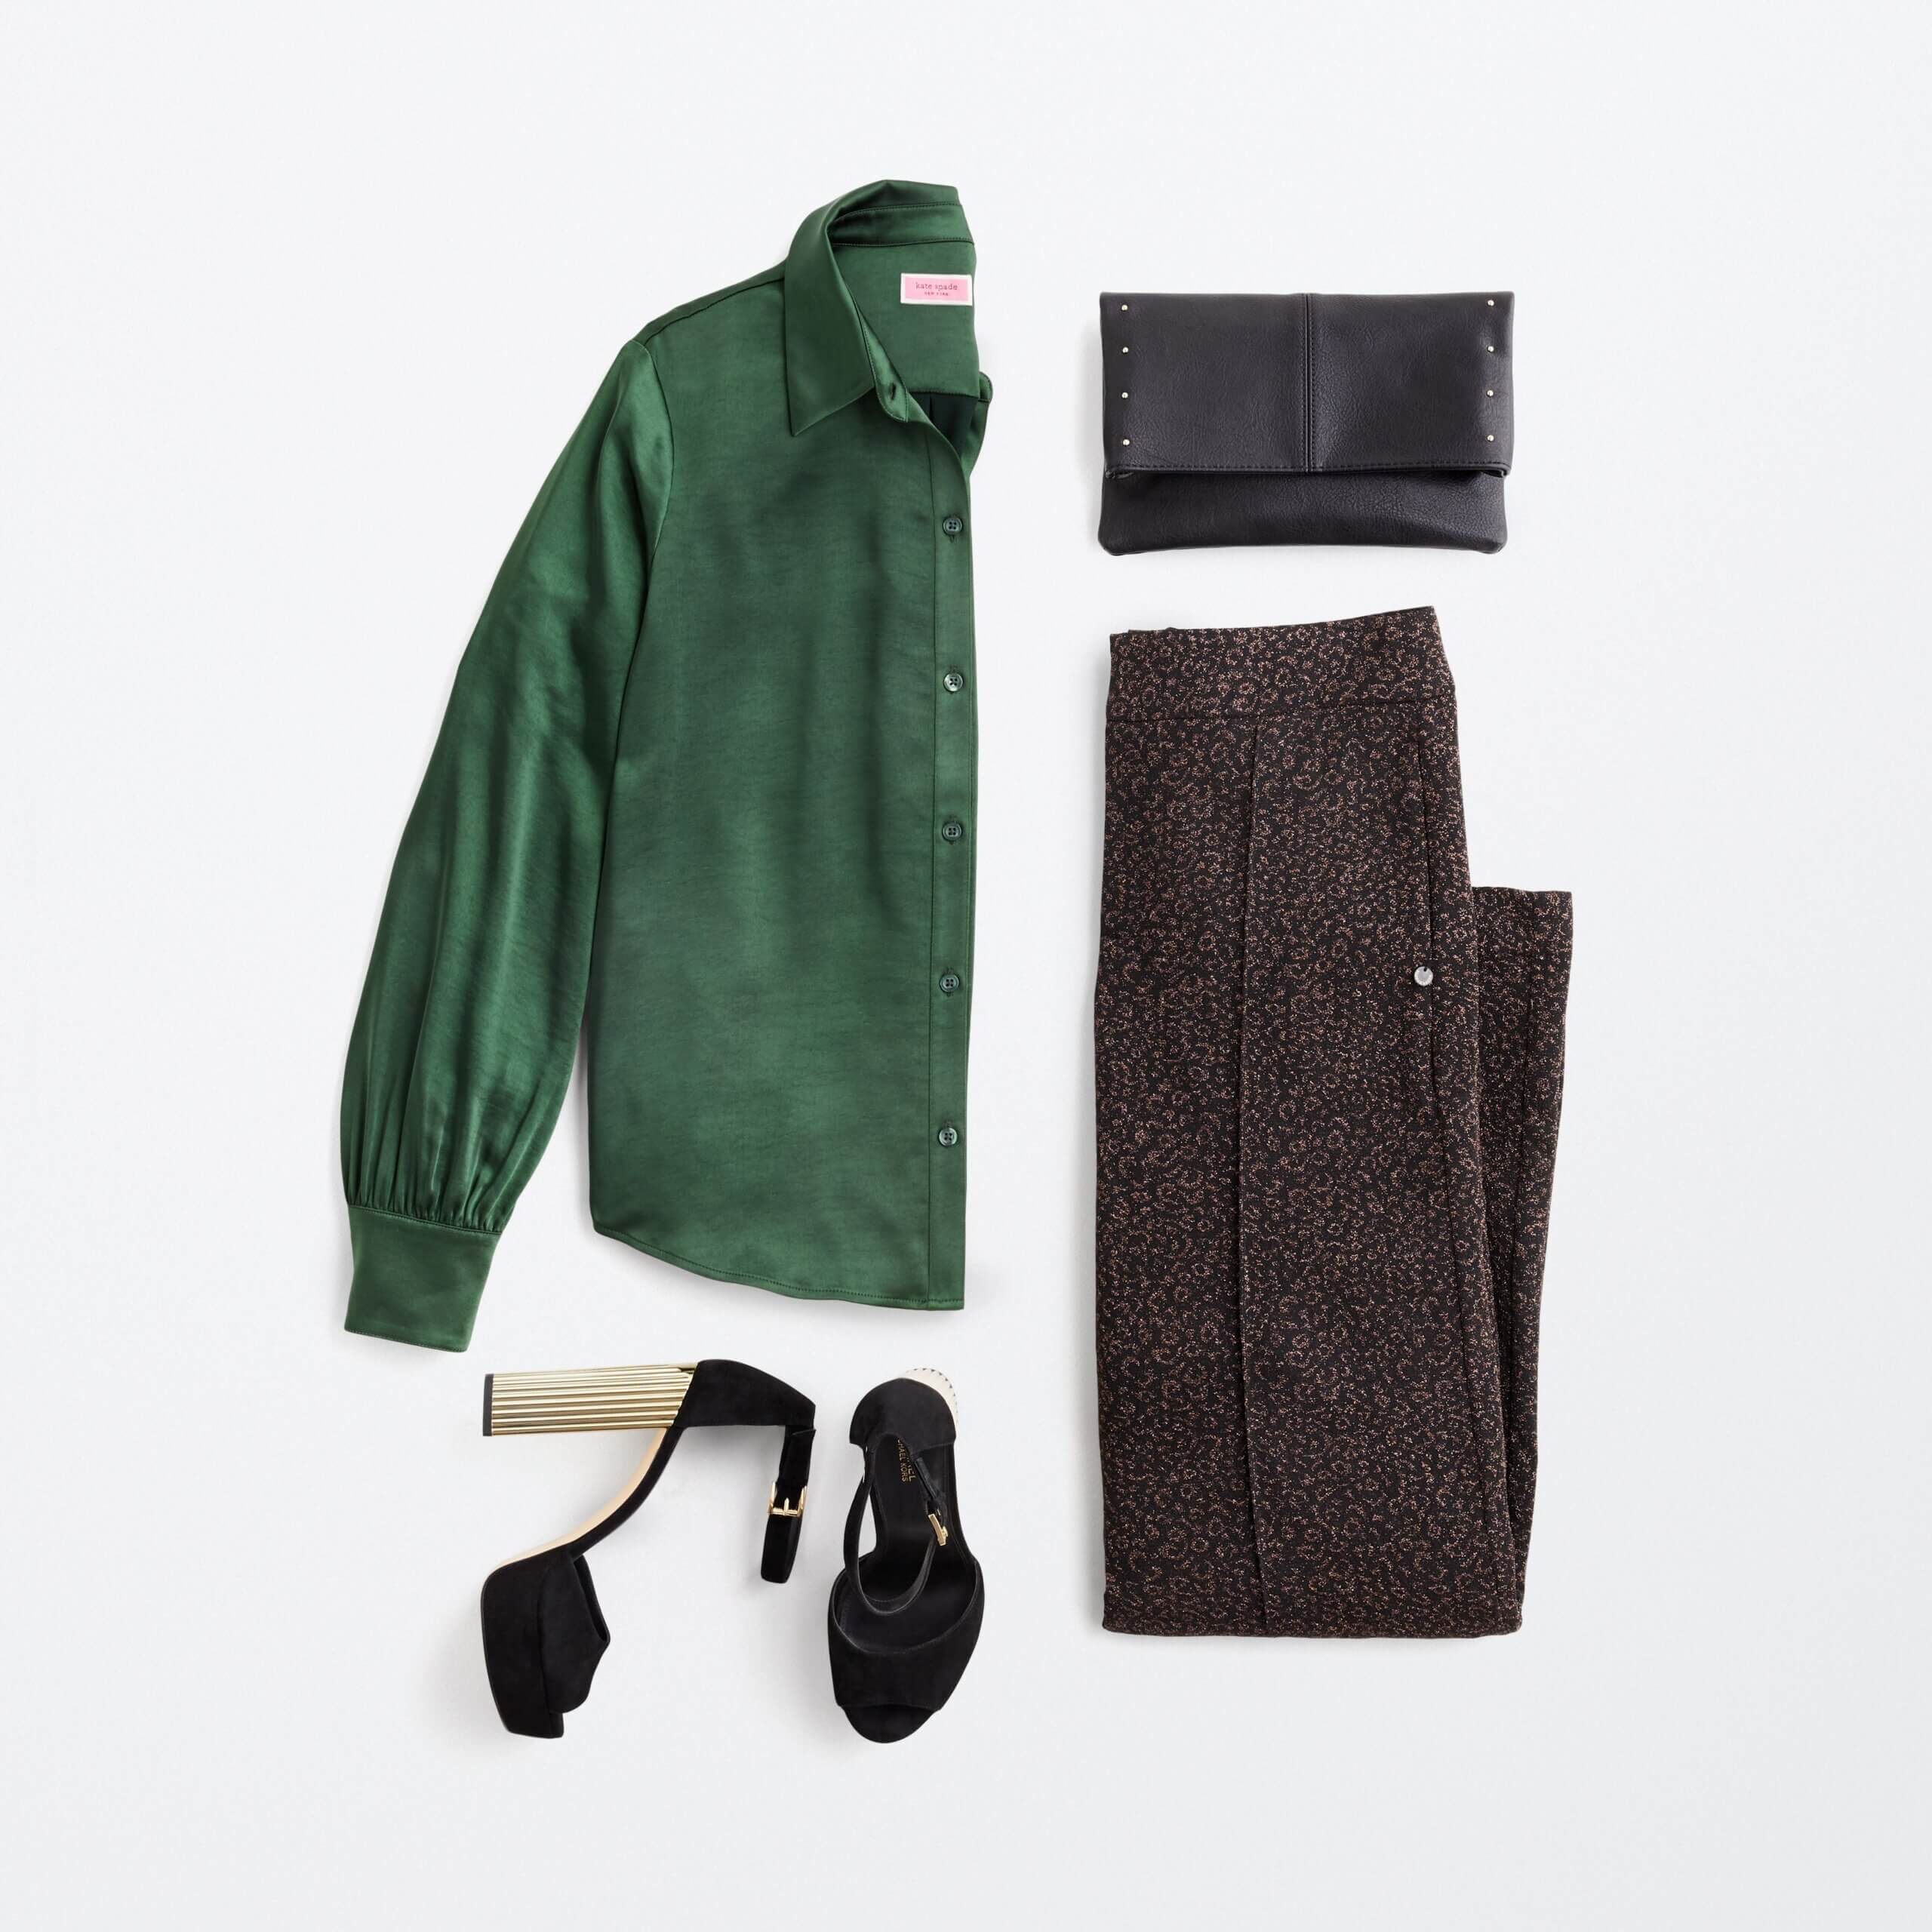 Stitch Fix women's outfit laydown featuring green slik blouse, brown wide-leg pants, black heels and black clutch.